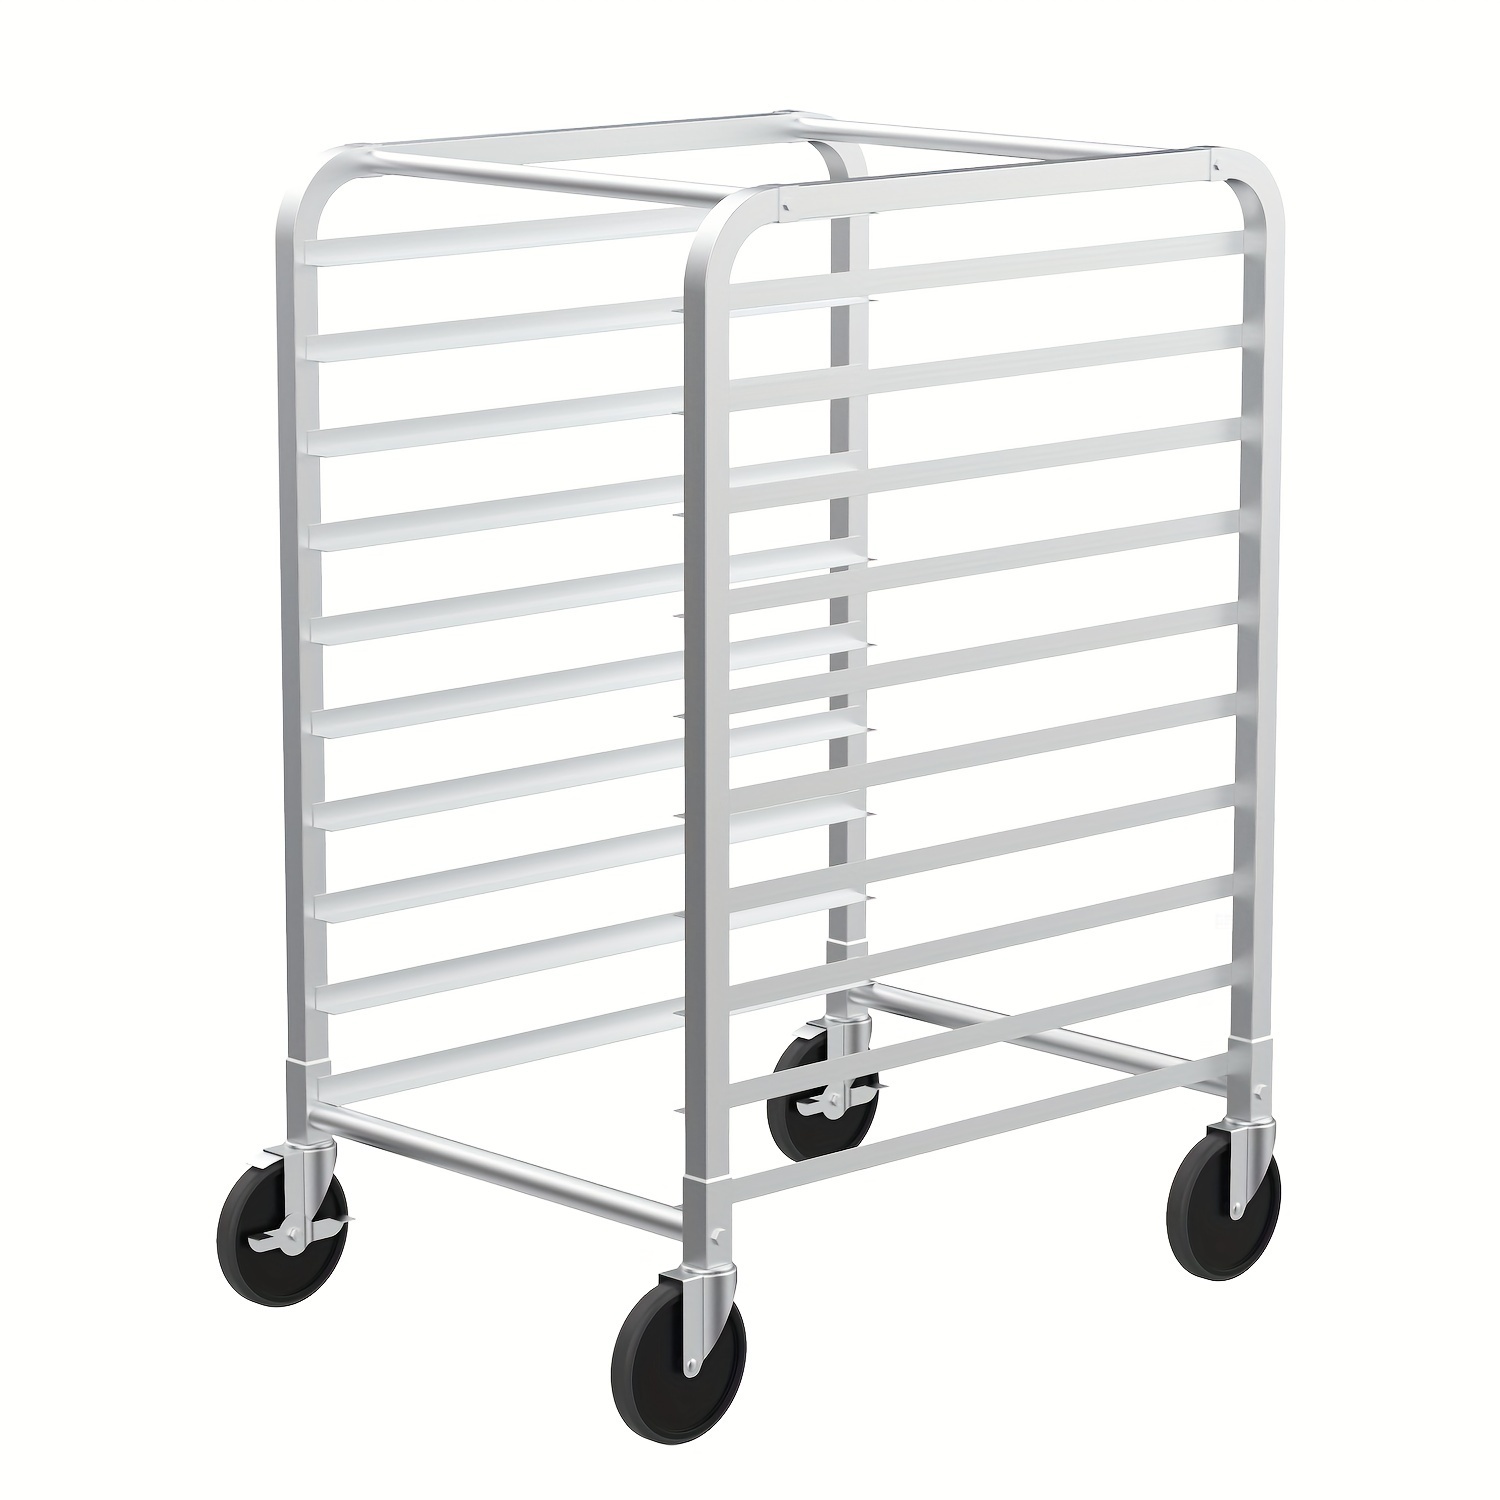 

10-tier Bakery Rack Stainless Steel 26 Inches Wide Bun Pan Sheet Rack Chef Use